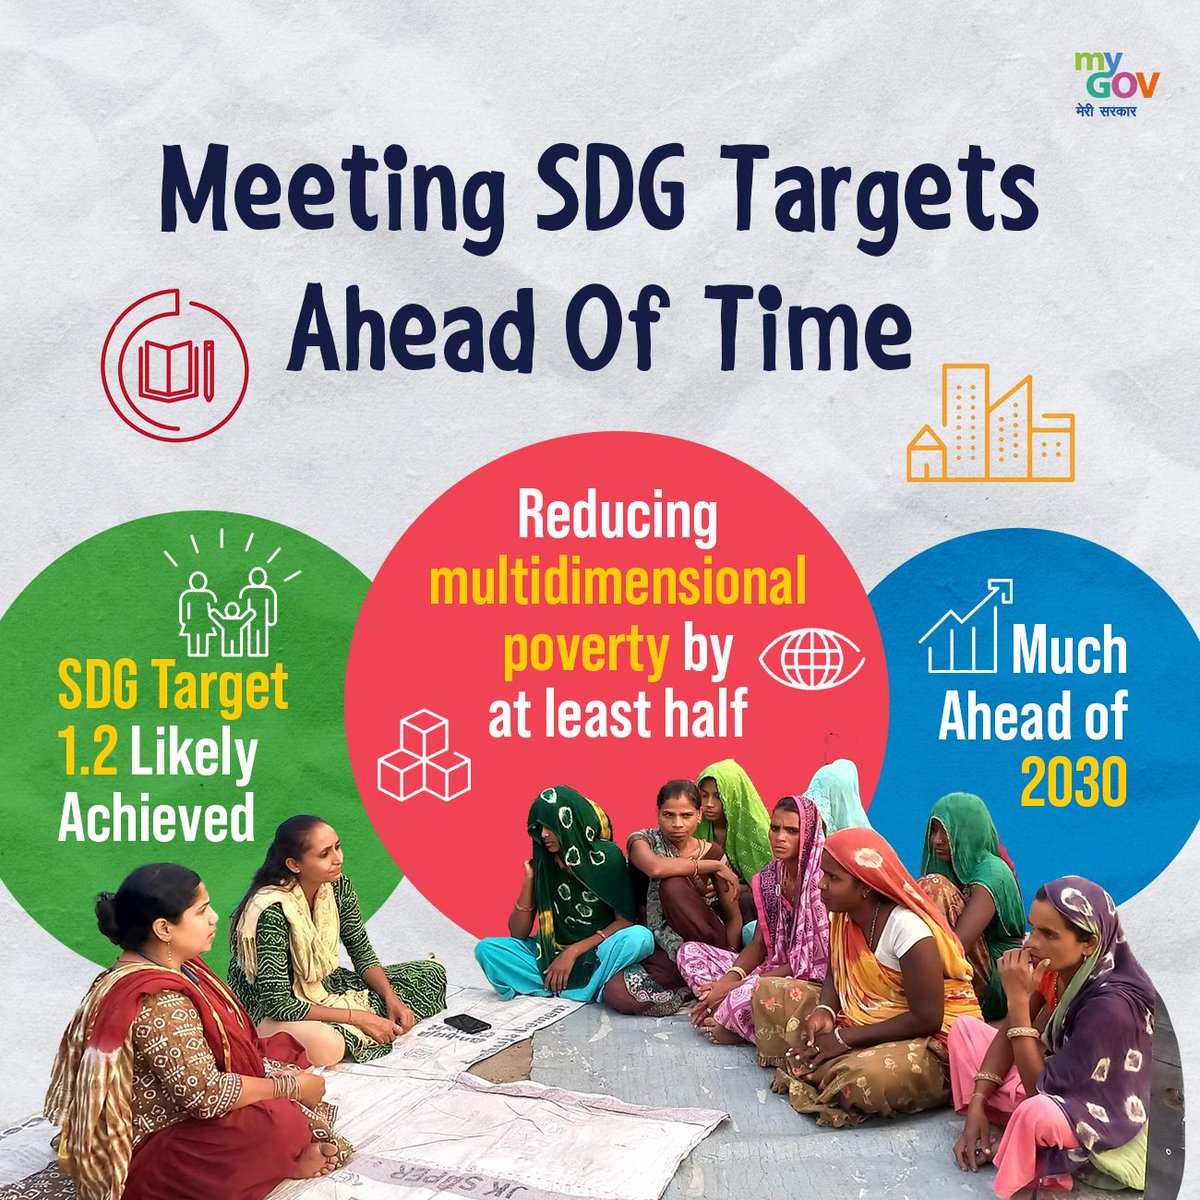 Ahead of Schedule in Meeting SDG Targets!

India is on track to likely achieve SDG Target 1.2, reducing multidimensional poverty by at least half, much ahead of the 2030 deadline.

#PovertyReduction
#NewIndia
#PovertyFreeIndia